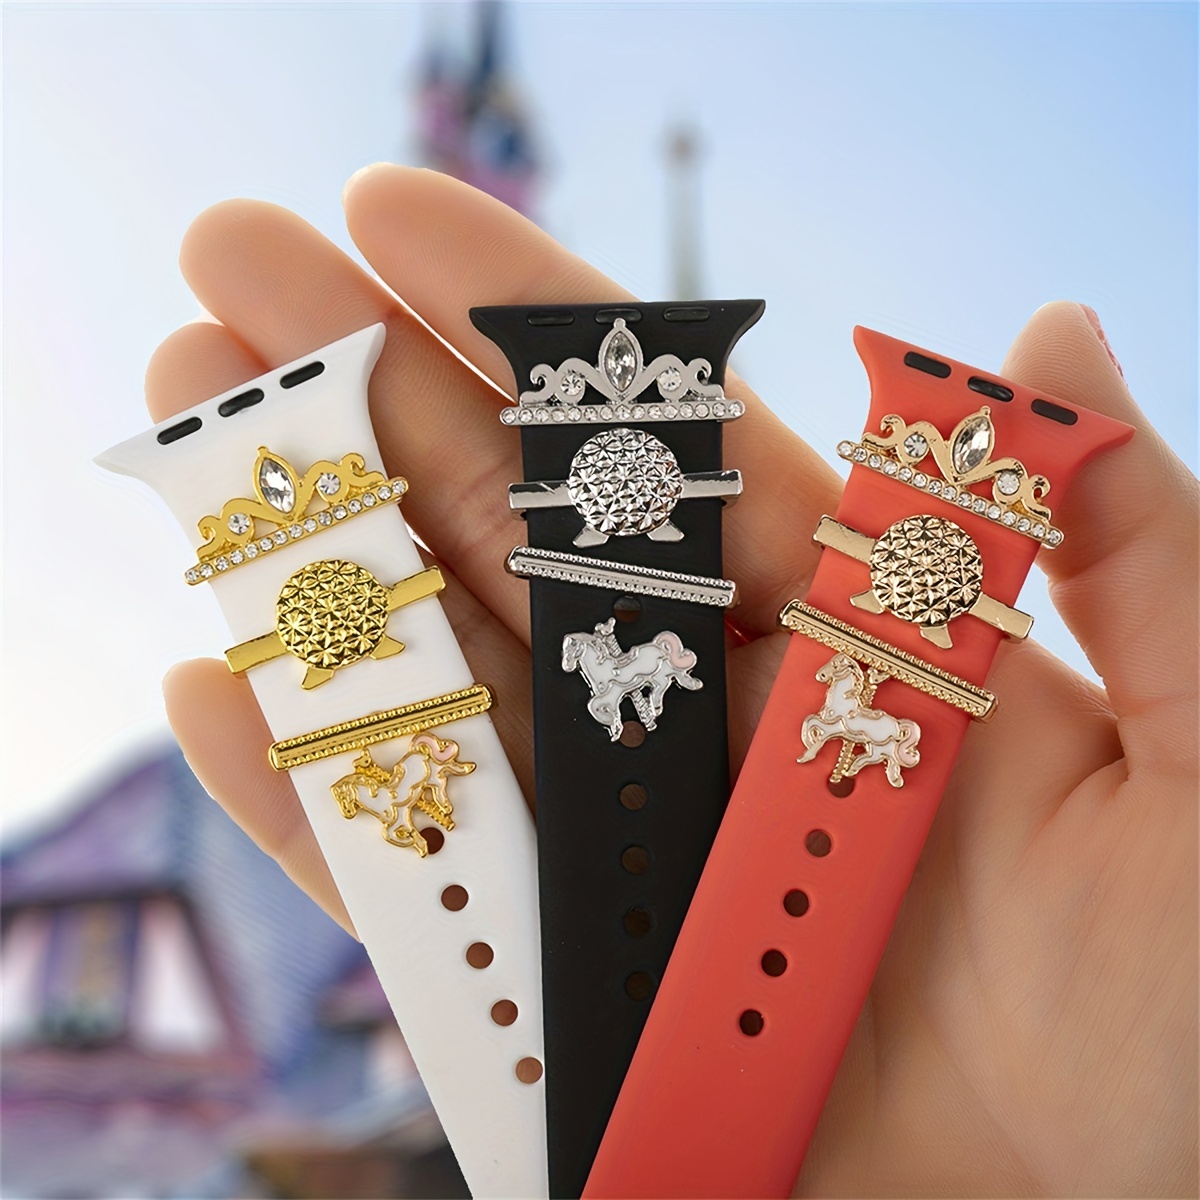 Smart Watch Accessories Set For Applewatch Watch With Decorative Ring Nails  Silicone Strap Decorative Combination